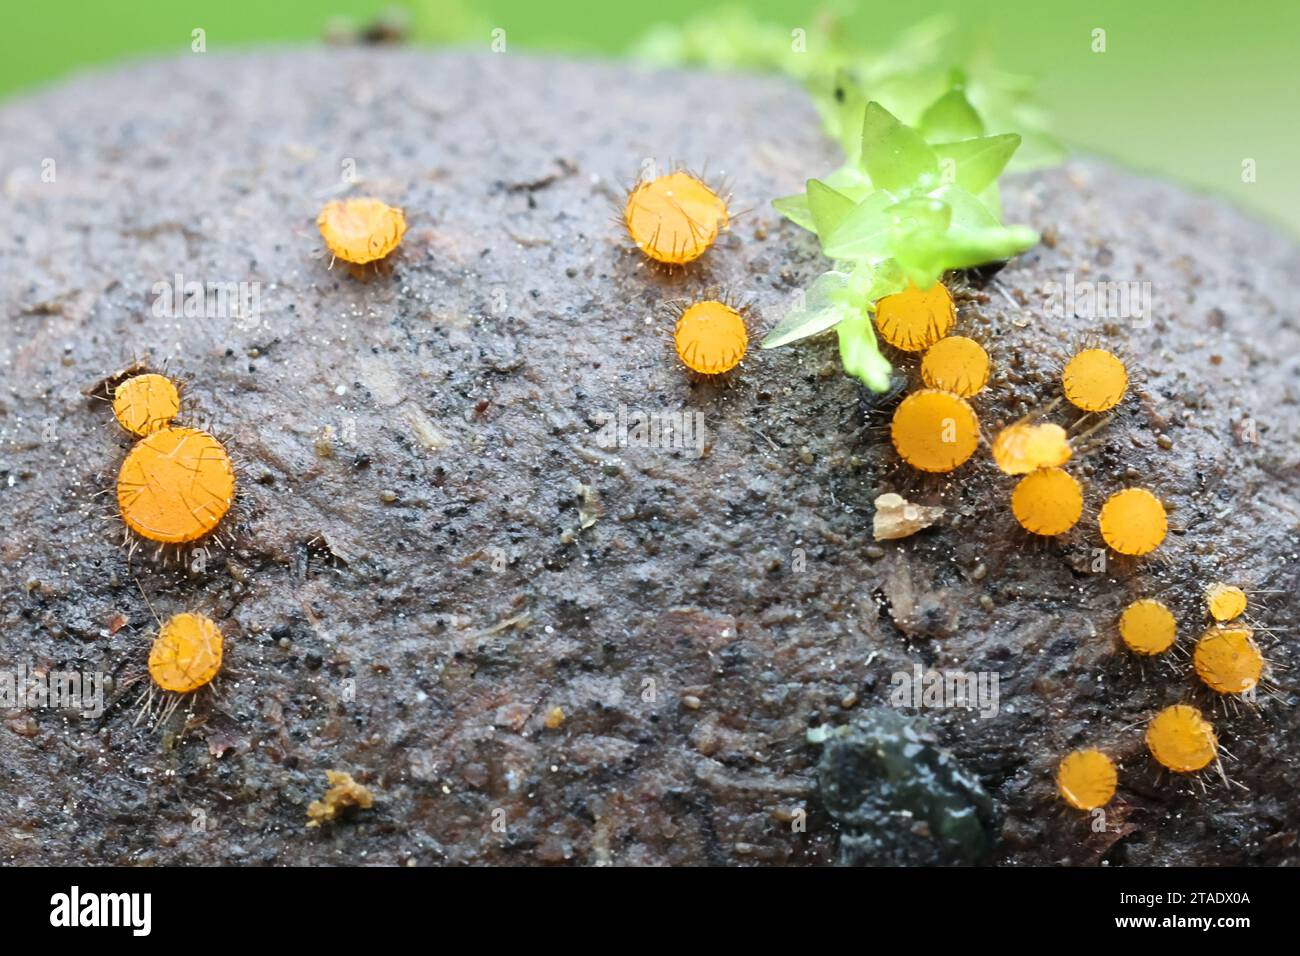 Cheilymenia parvispora, copriphilous fungus growing on moose dung in Finland, no common English name Stock Photo